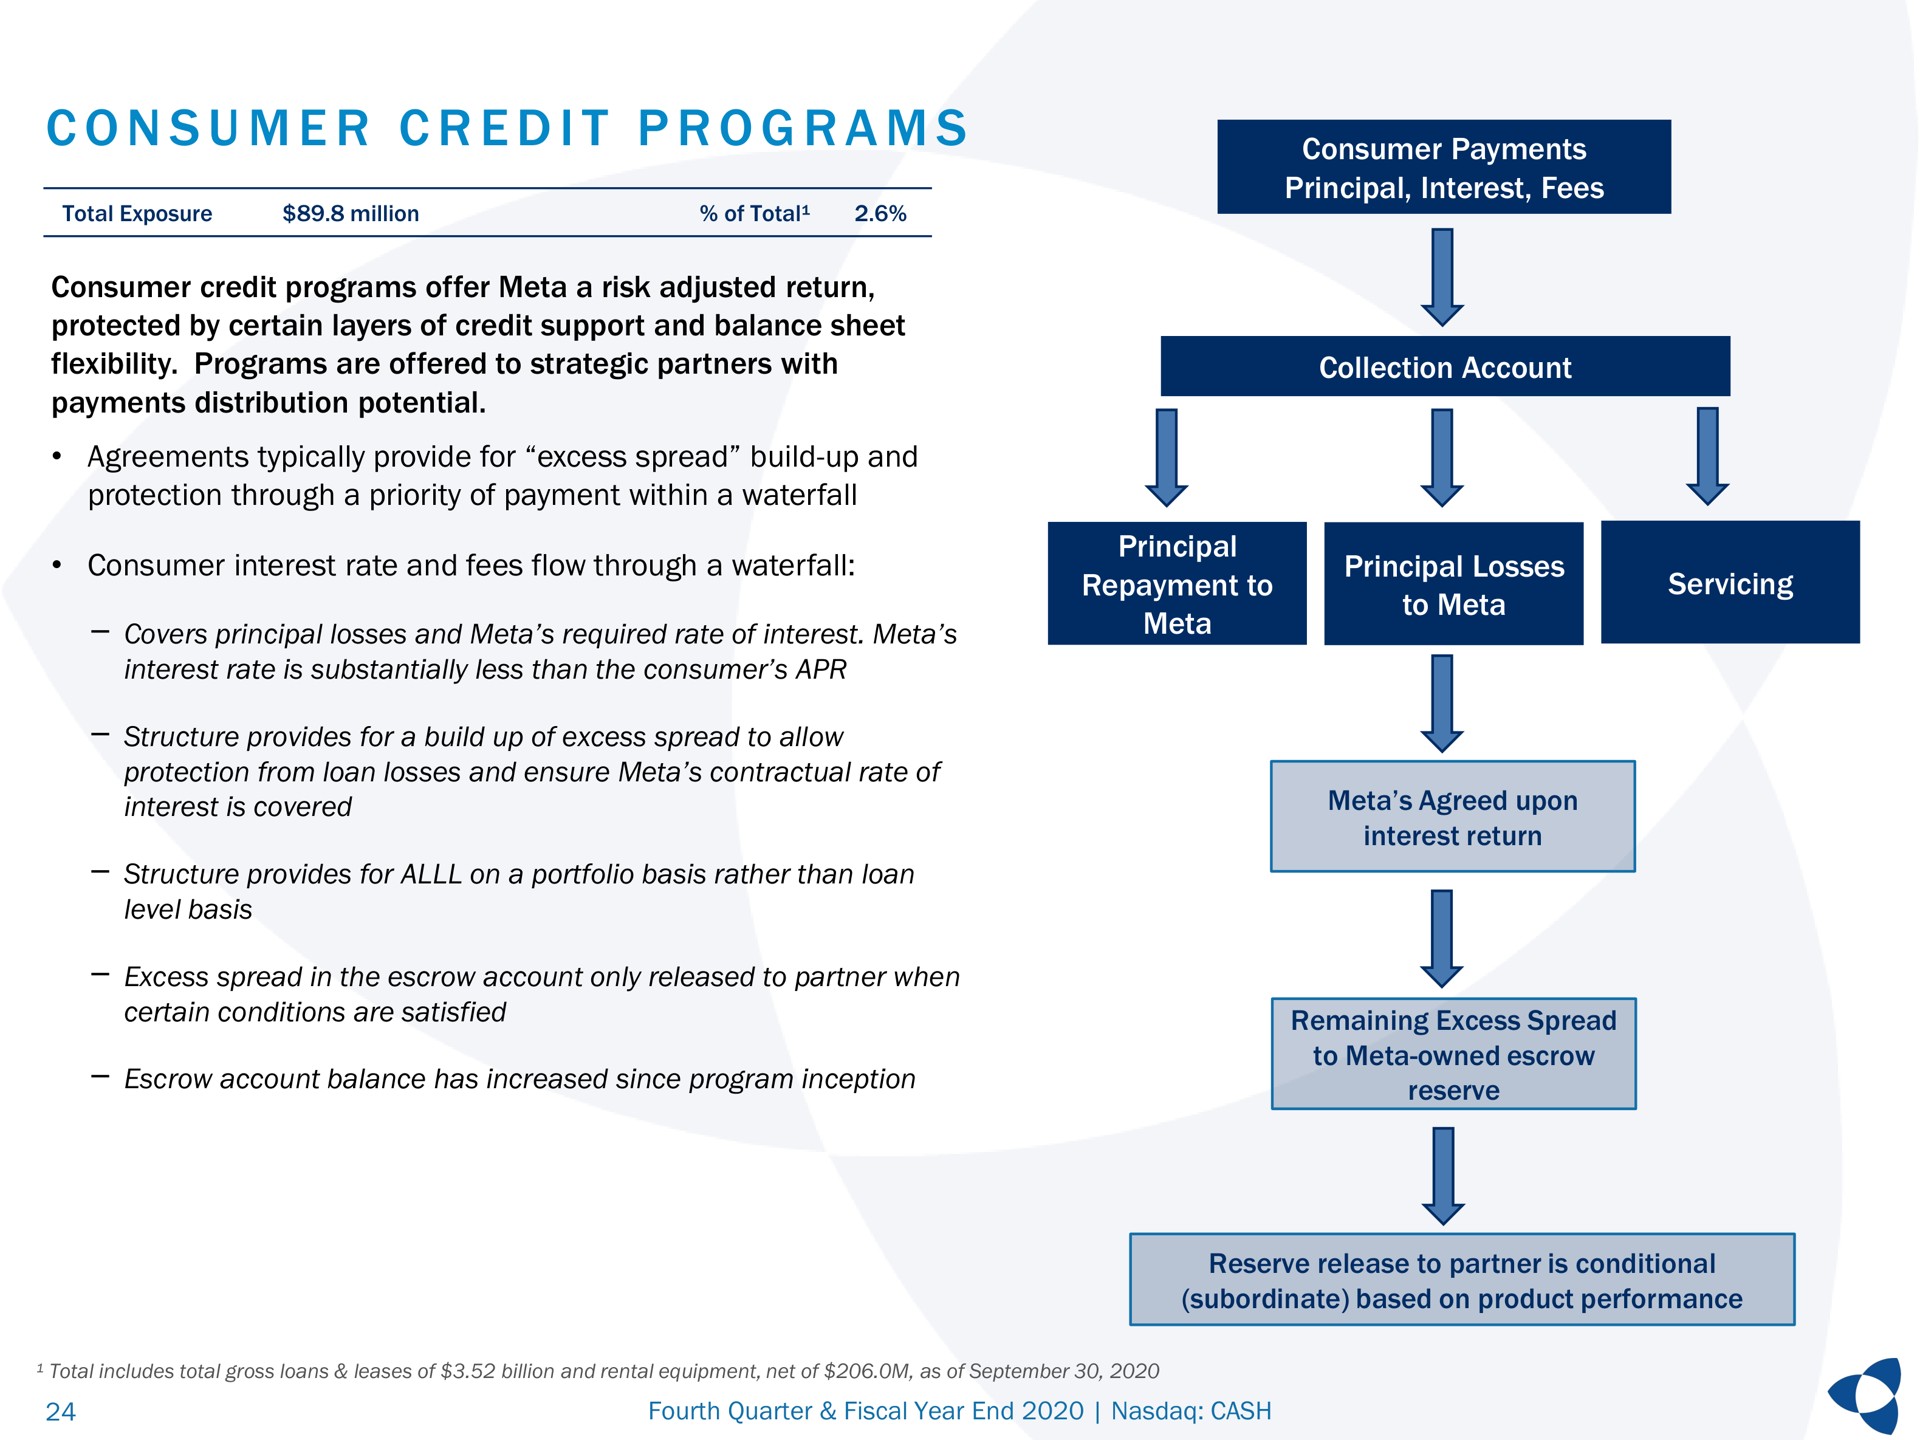 i a consumer credit programs interest is covered meta agreed upon | Pathward Financial